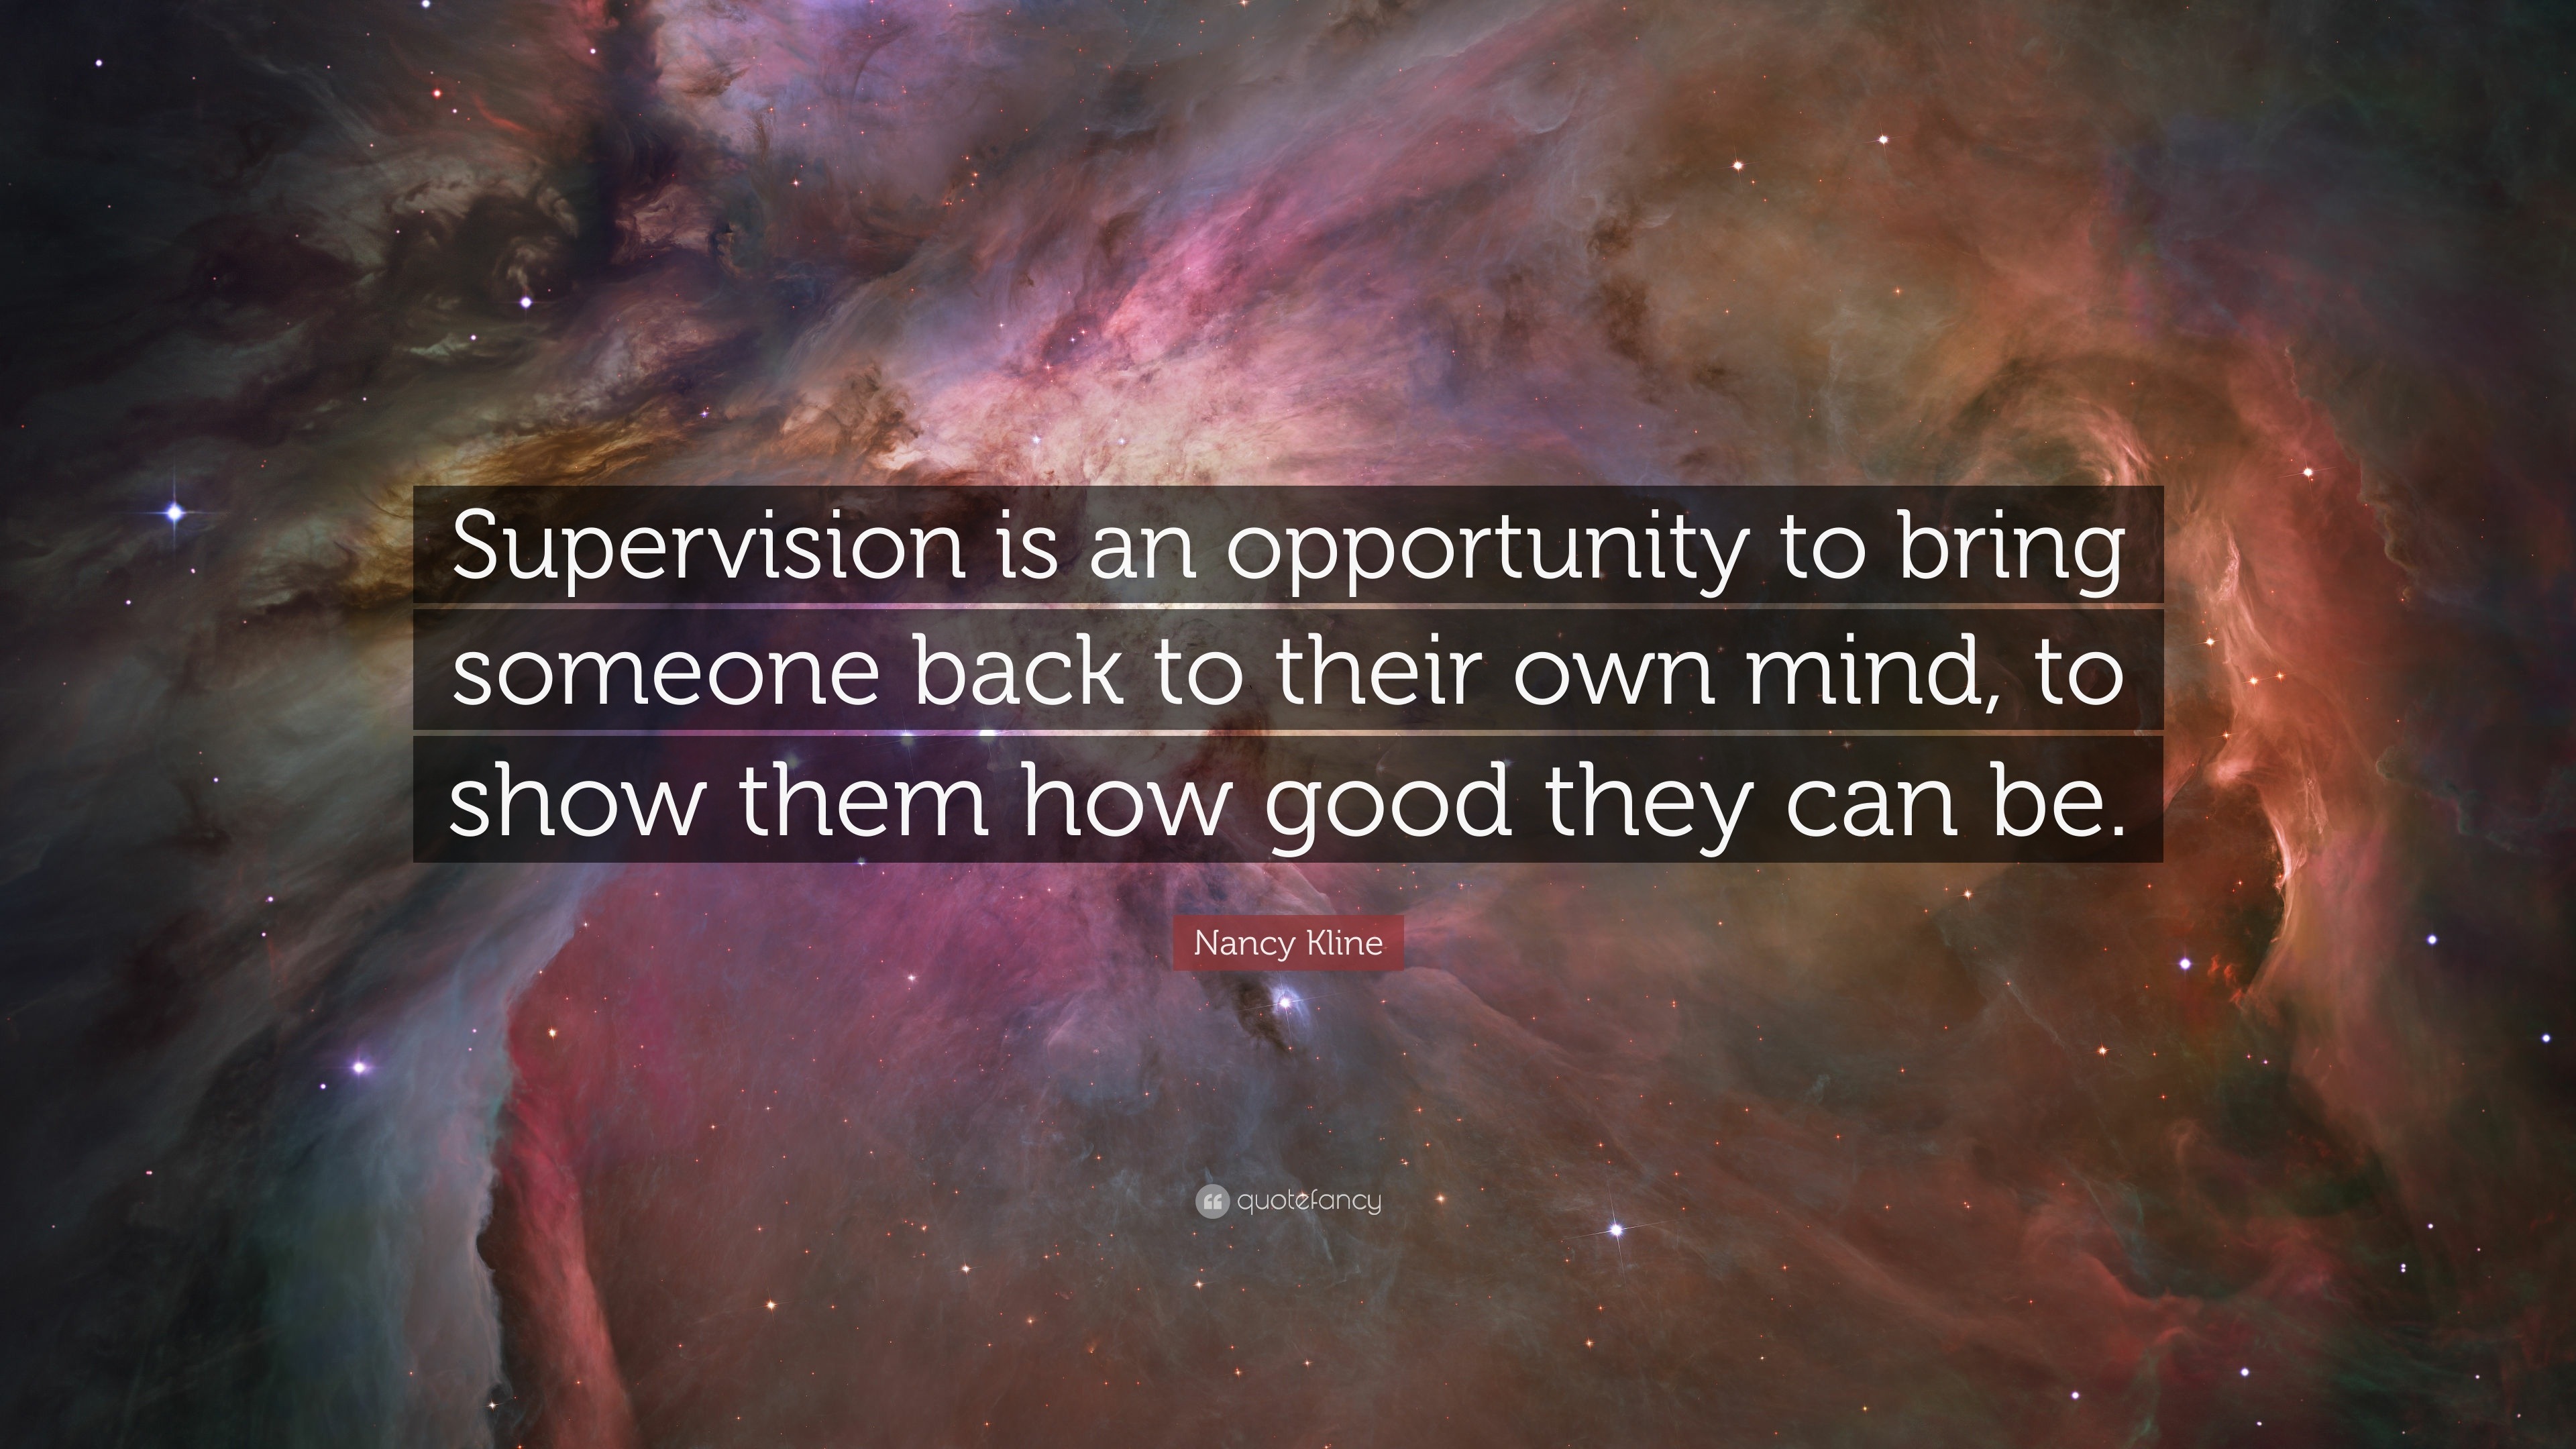 Nancy Kline Quote: “Supervision is an opportunity to bring someone back